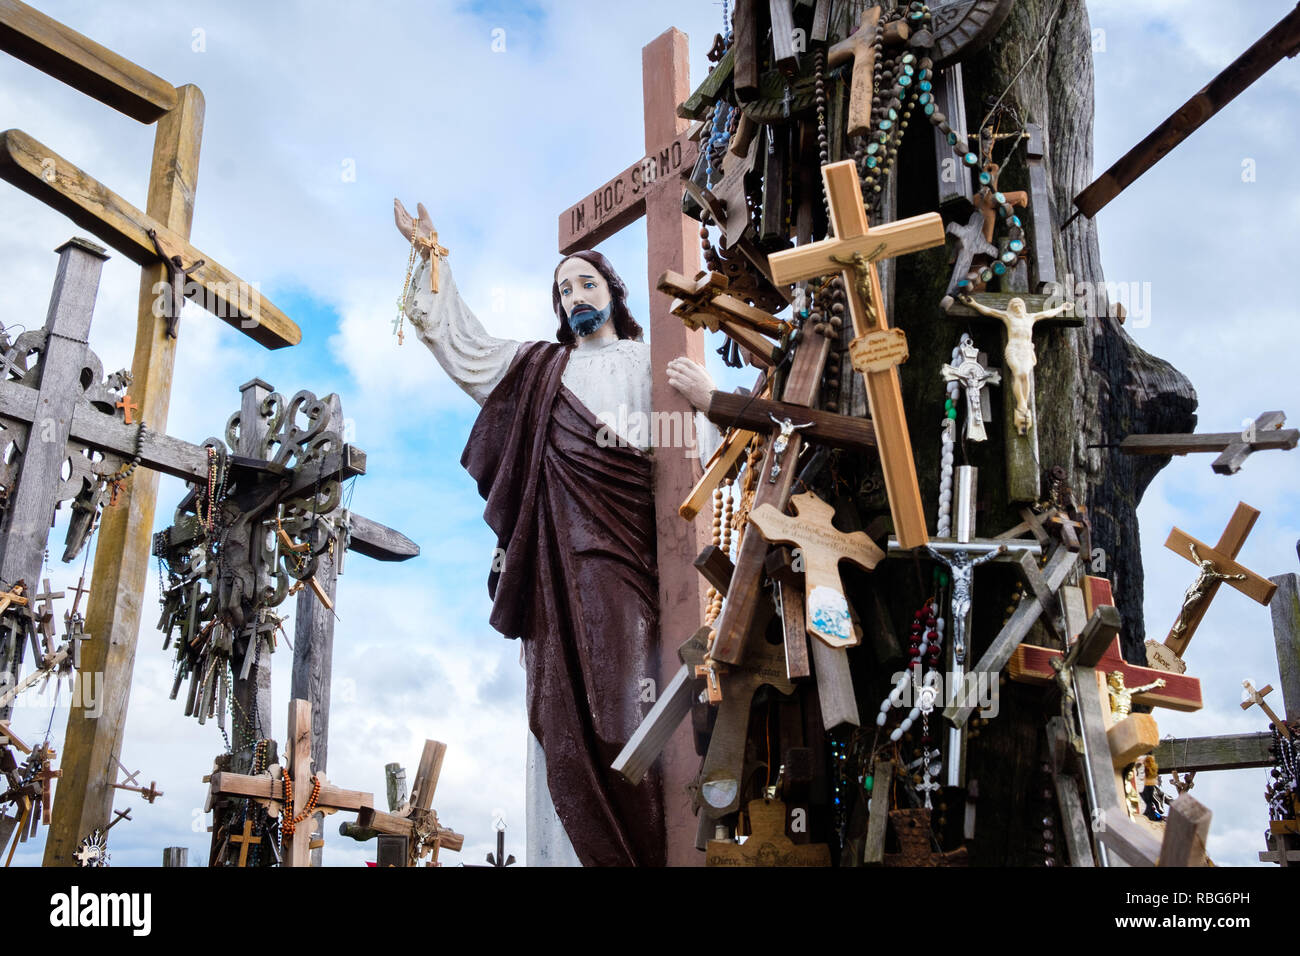 Lithuania, Siauliai: the Hill of Crosses. The Hill of Crosses, a pilgrimage site, symbol of Lithuanian defiance of foreign invaders, with over 100.000 Stock Photo